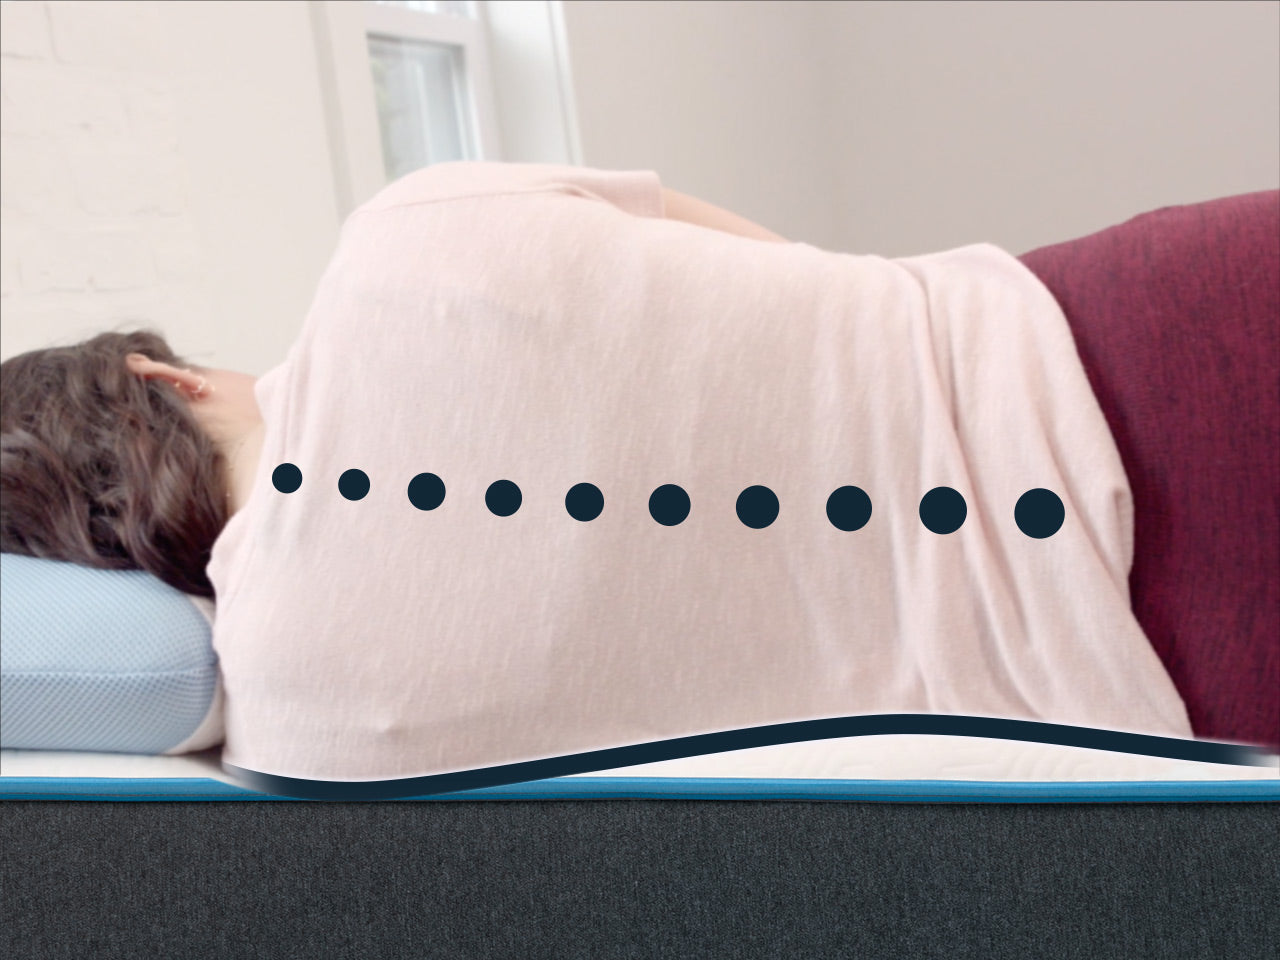 Adapts to Your Shape and Sleep Position